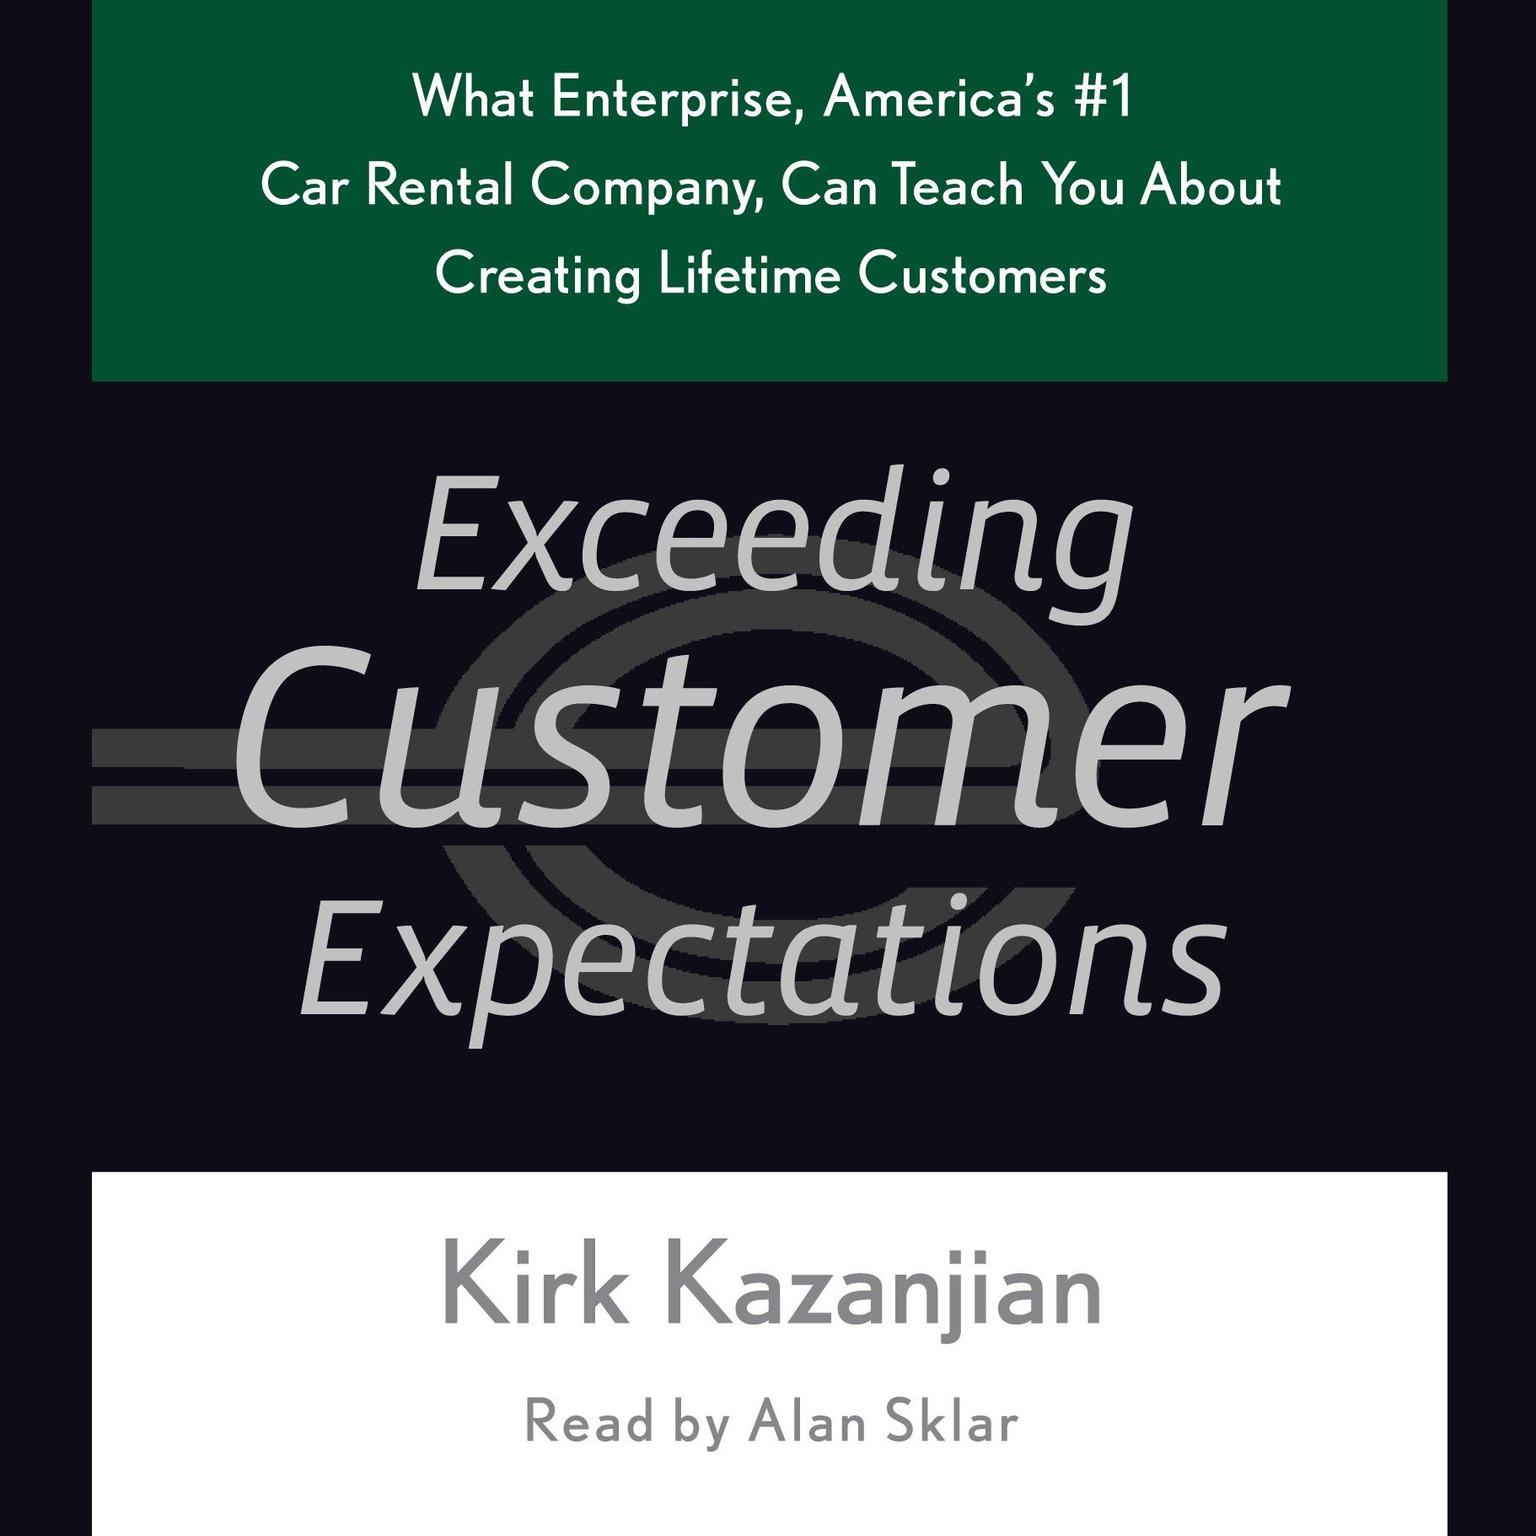 Exceeding Customer Expectations (Abridged): What Enterprise, Americas #1 car rental company, can teach you about creating lifetime customers Audiobook, by Kirk Kazanjian